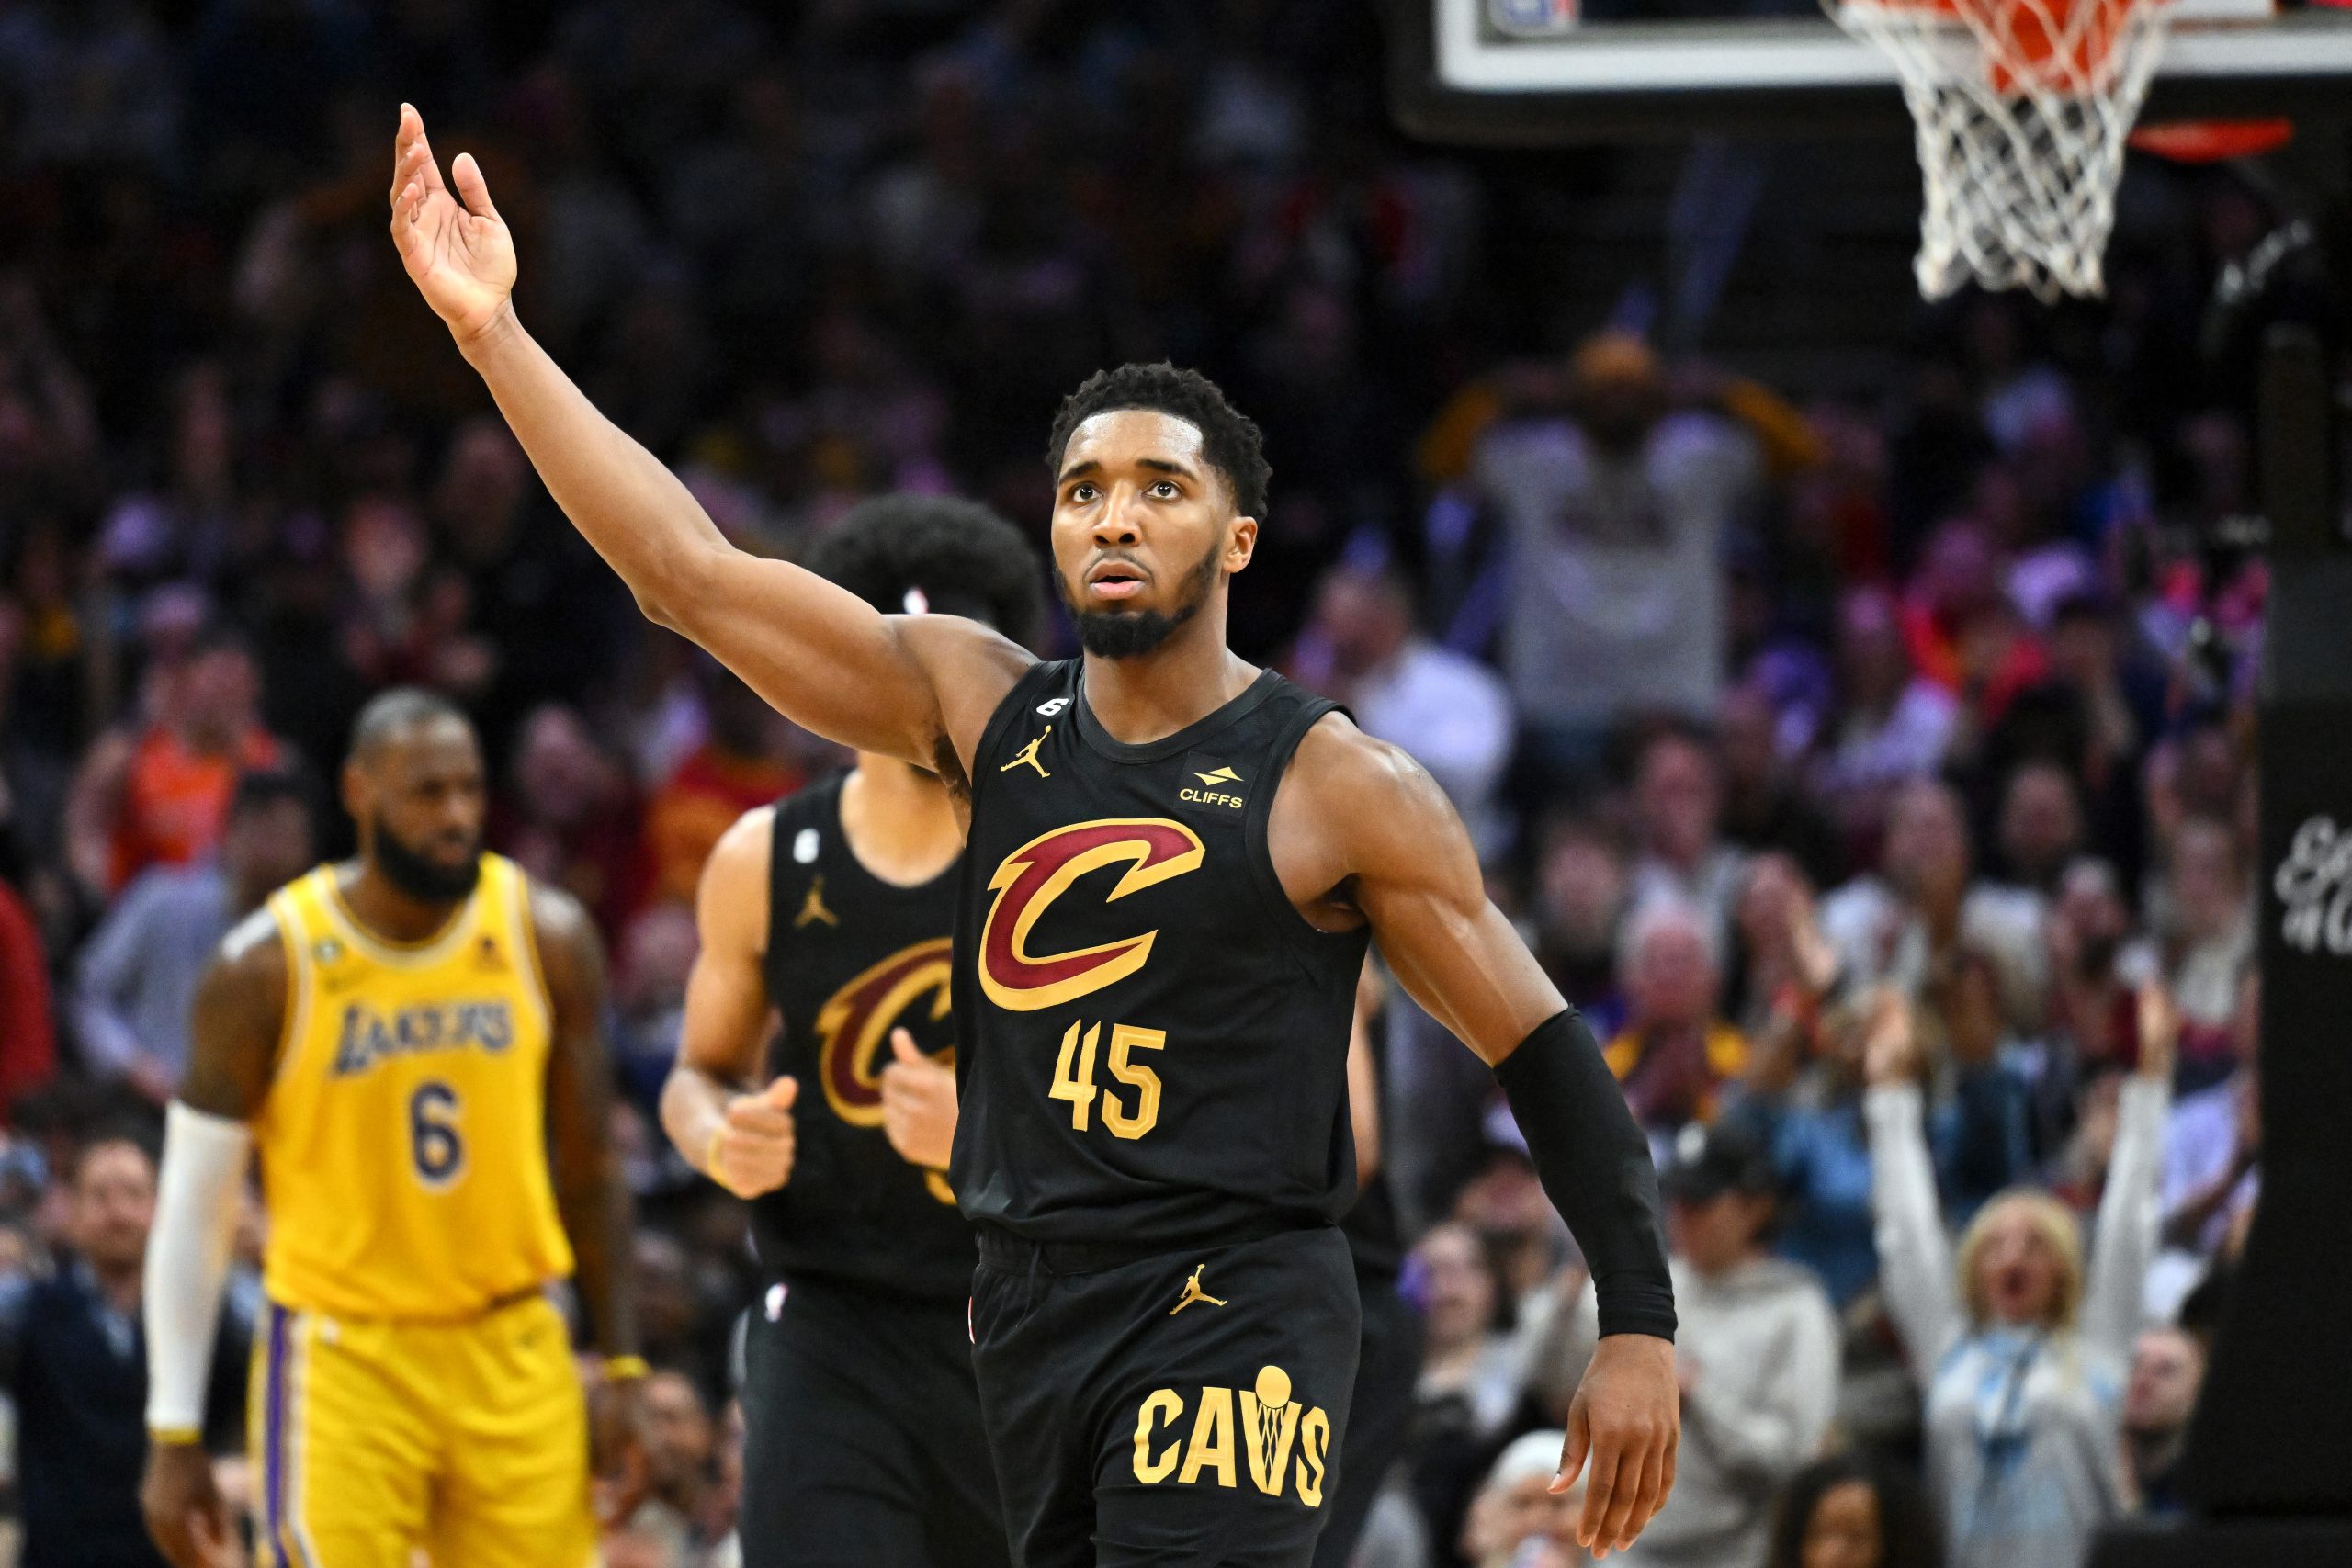 ‘GO THE F HOME’: Donovan Mitchell’s Dominance Sends a Message to the Lakers (and the NBA)